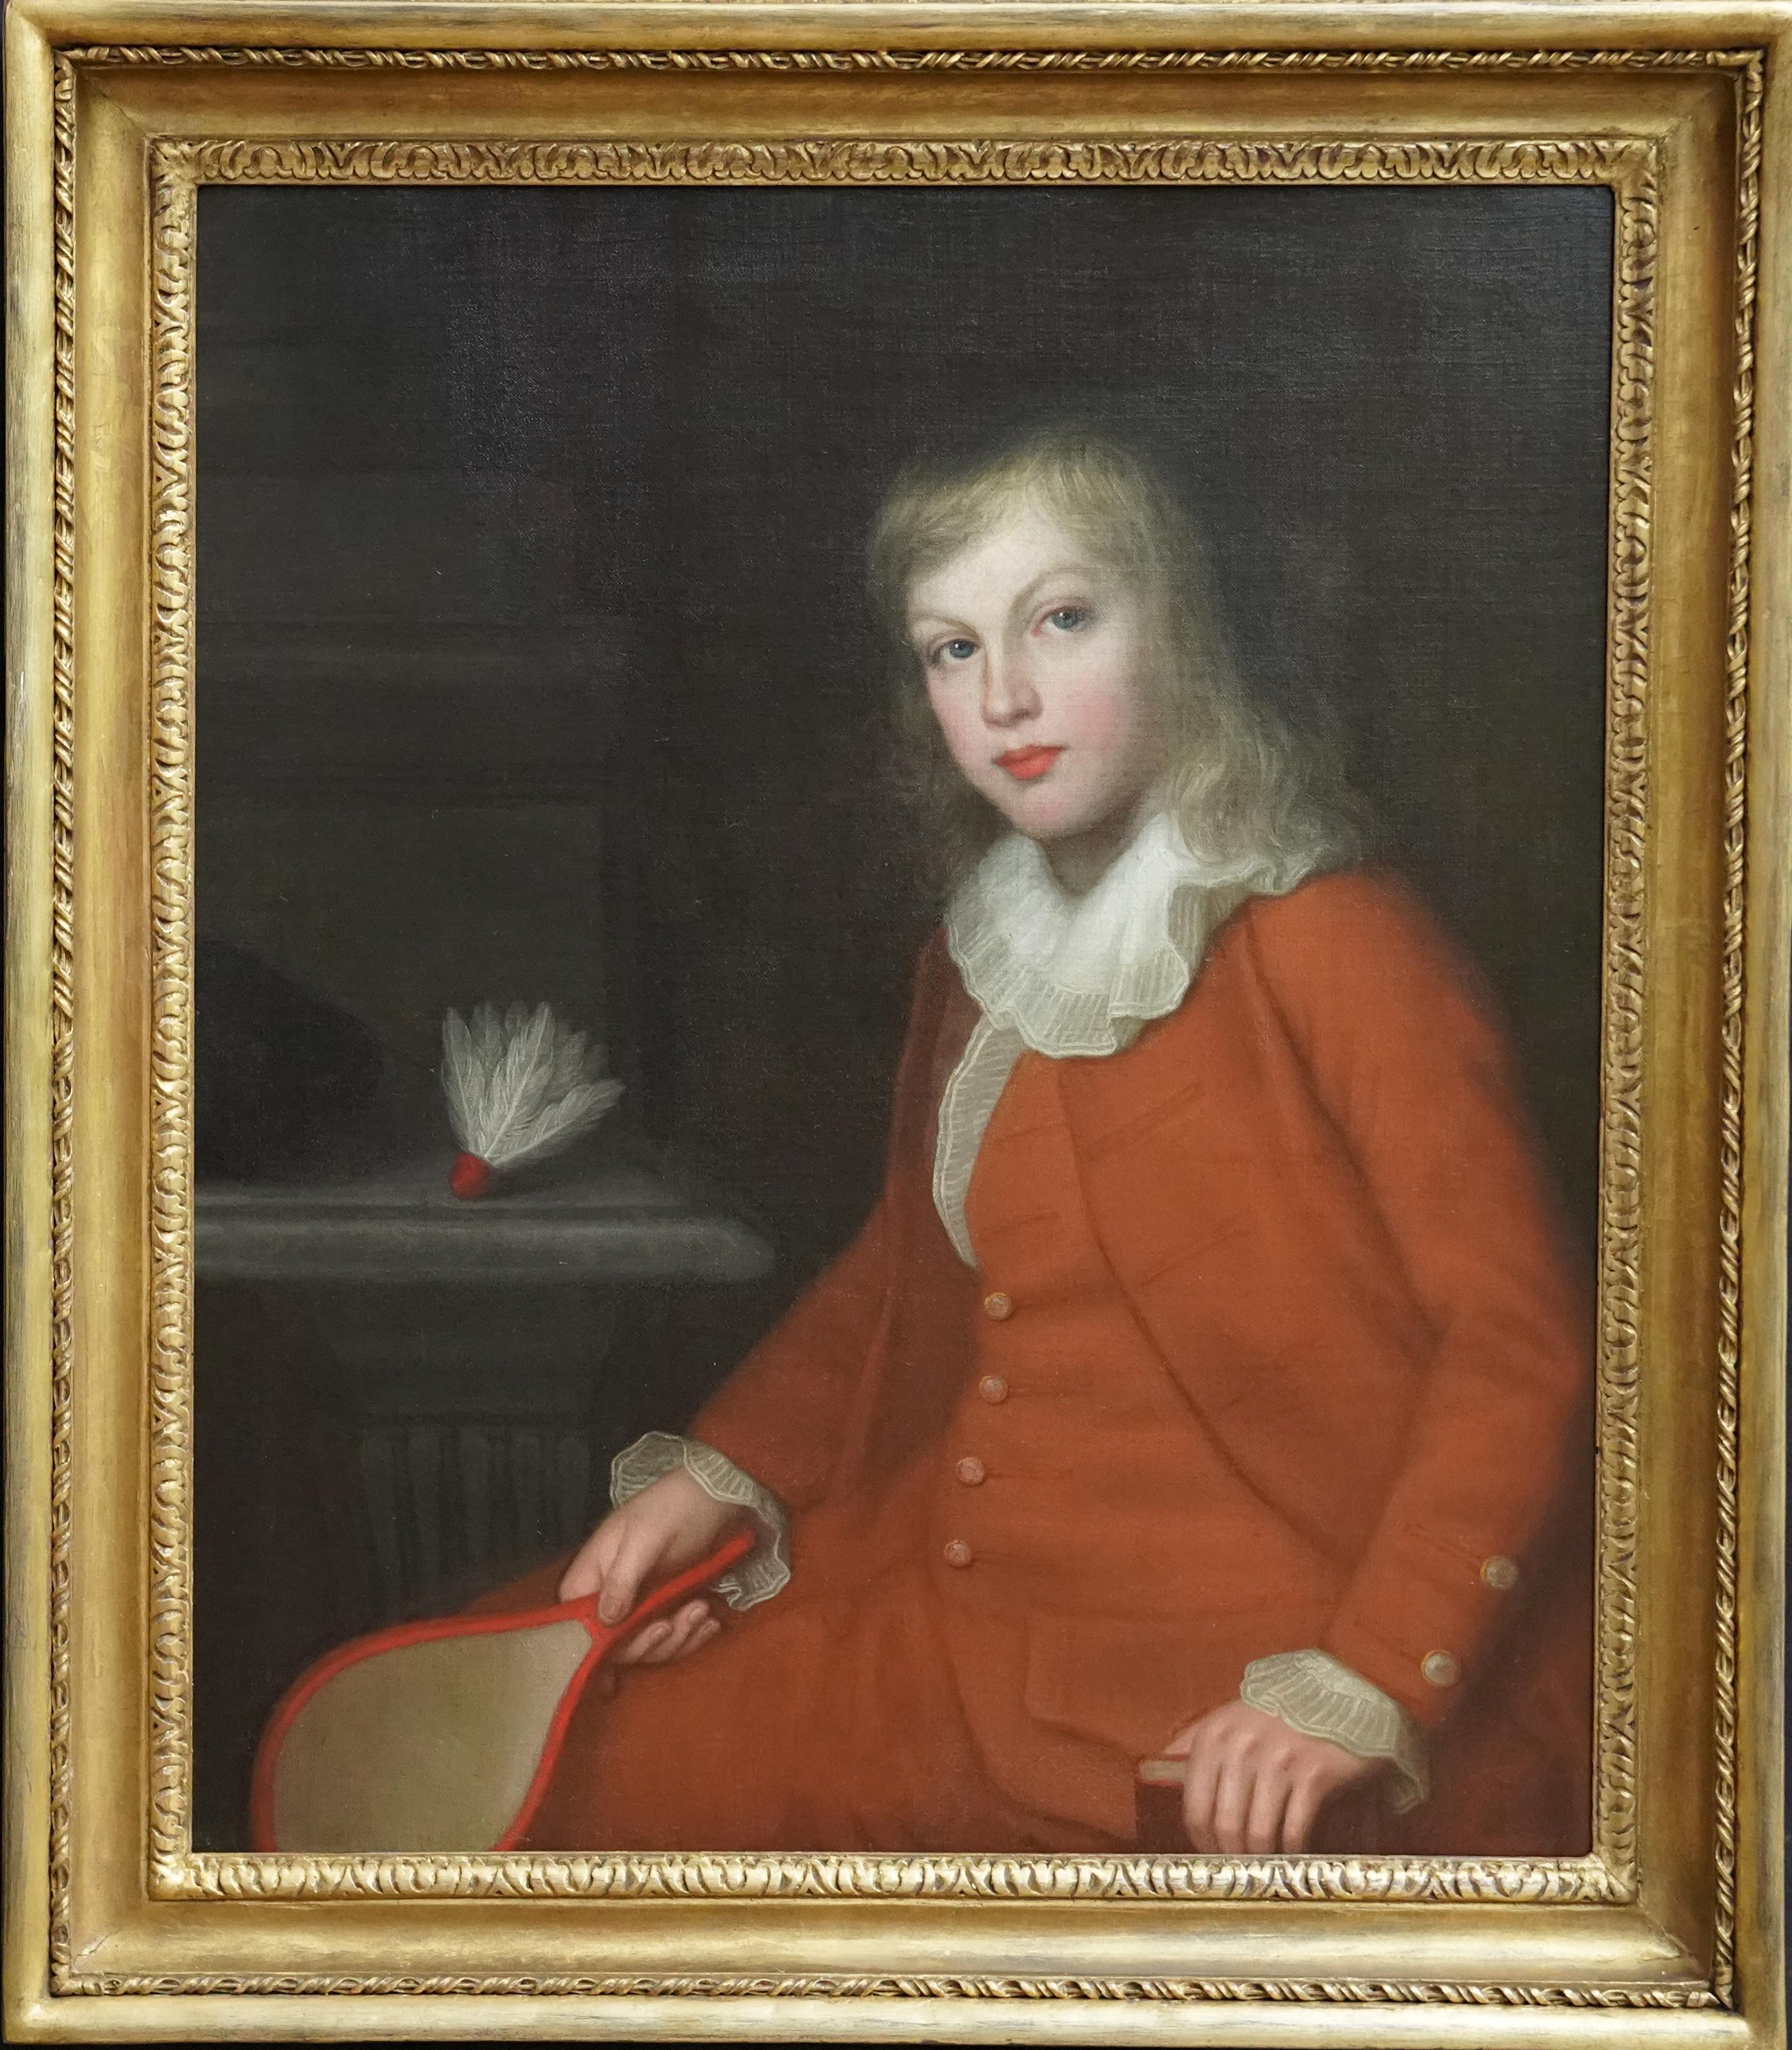 Thomas Beach Portrait Painting - Portrait of Robert Monypenny with Racket - British 18th century art oil painting